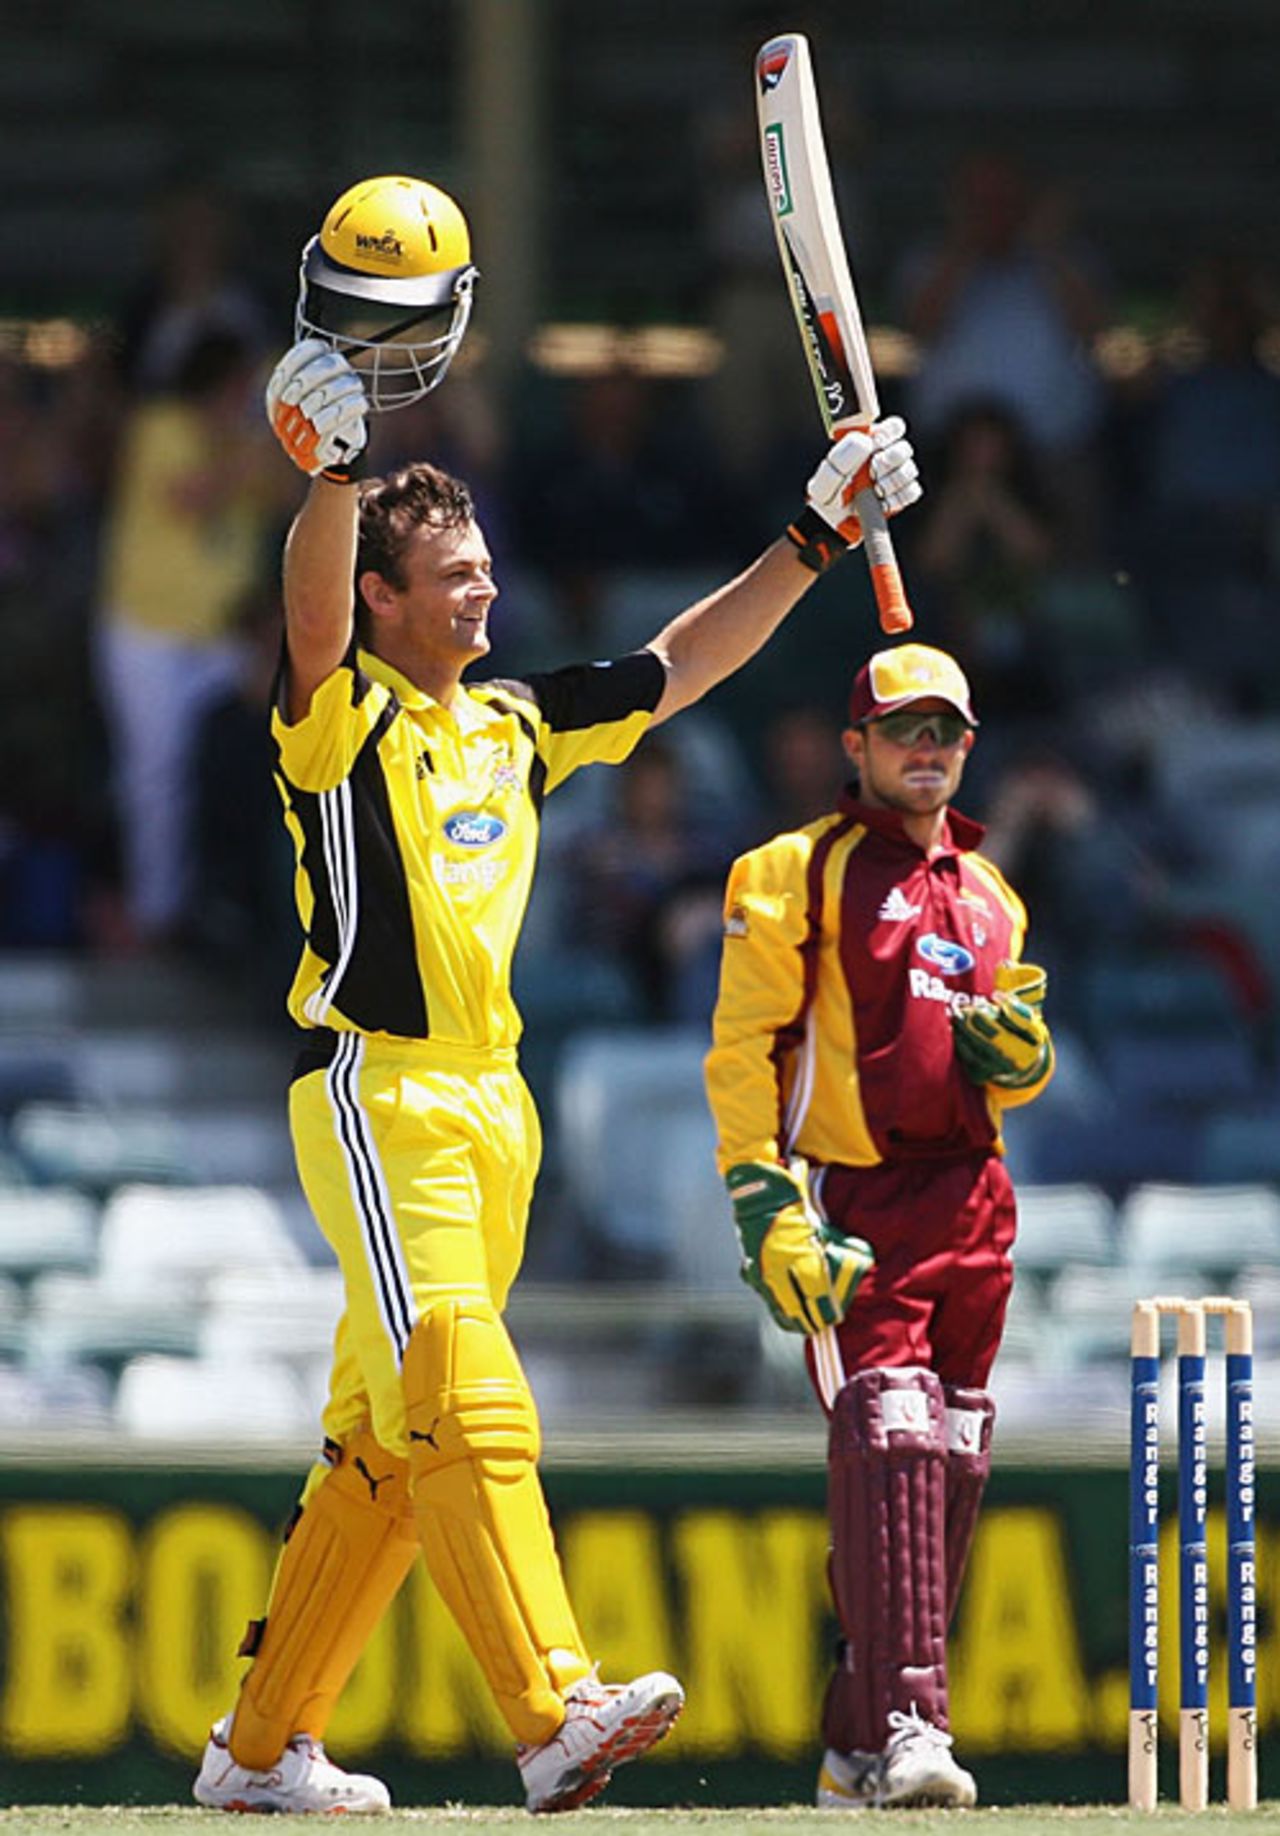 Adam Gilchrist celebrates his brilliant 63-ball hundred, the second fastest in the history of the Australia domestic one-day competition, Western Australia v Queensland, Ford Ranger One Day Cup, Perth, November 17, 2006